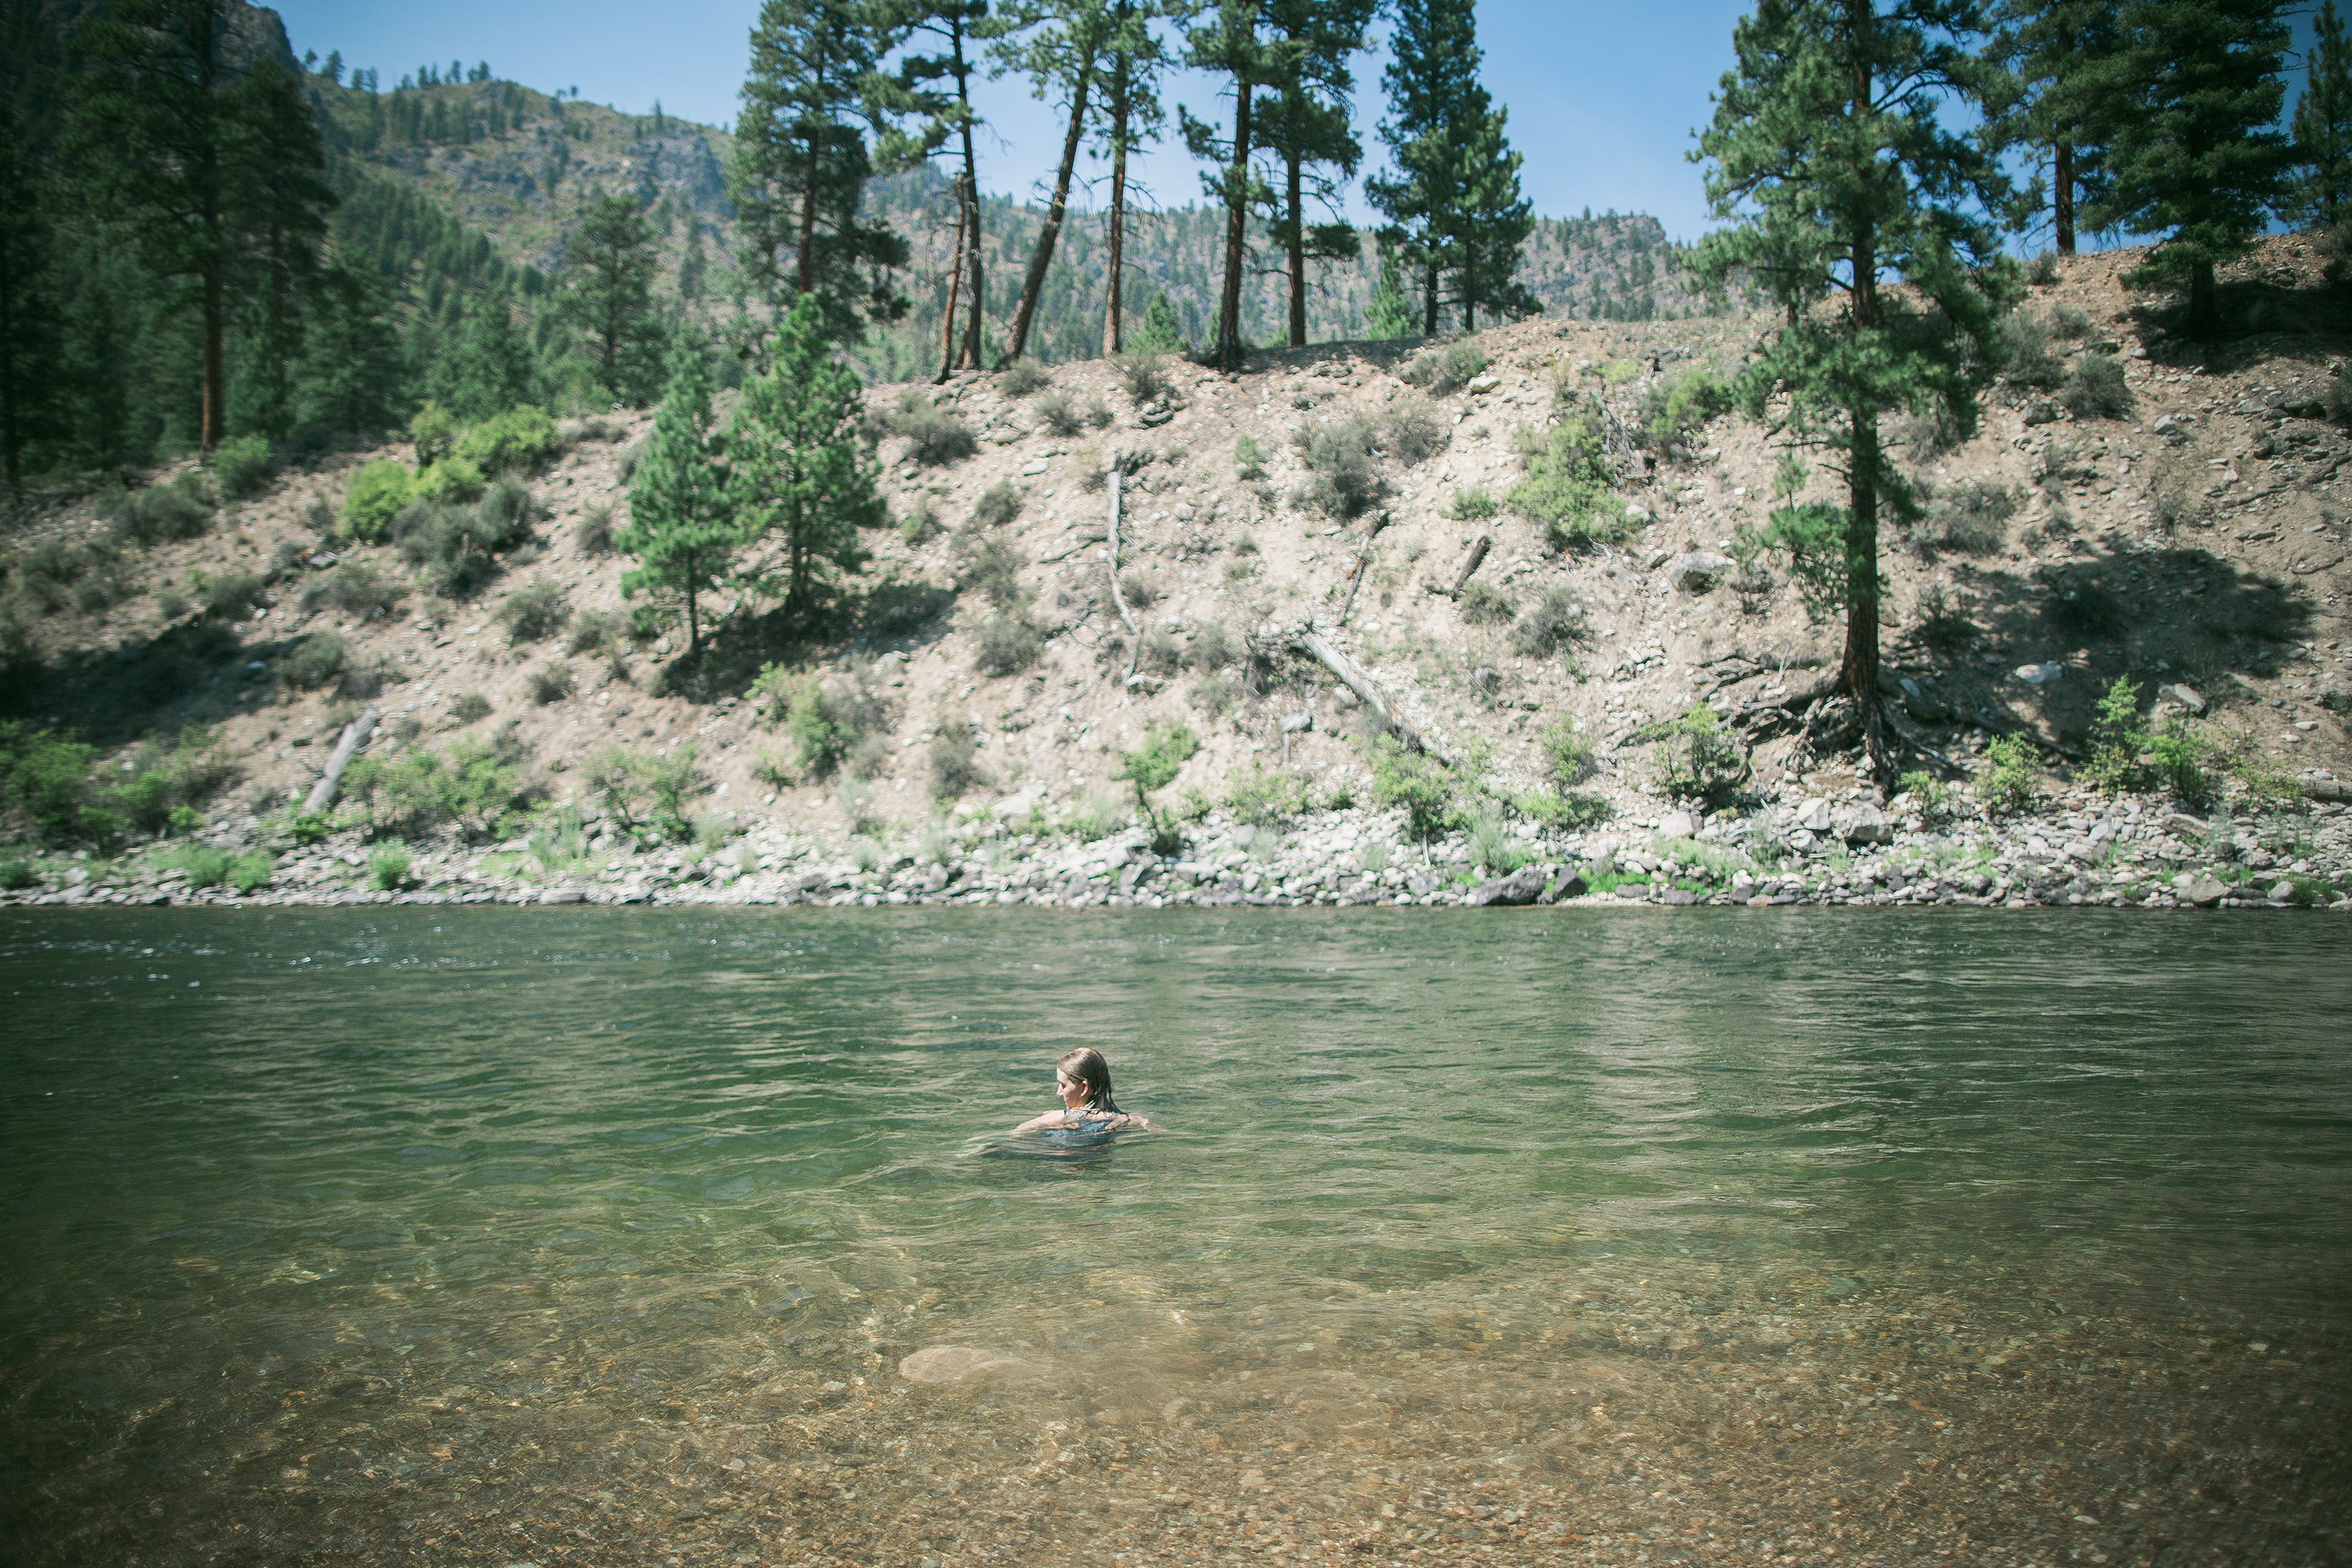 warm salmon river weather means lots of swimming